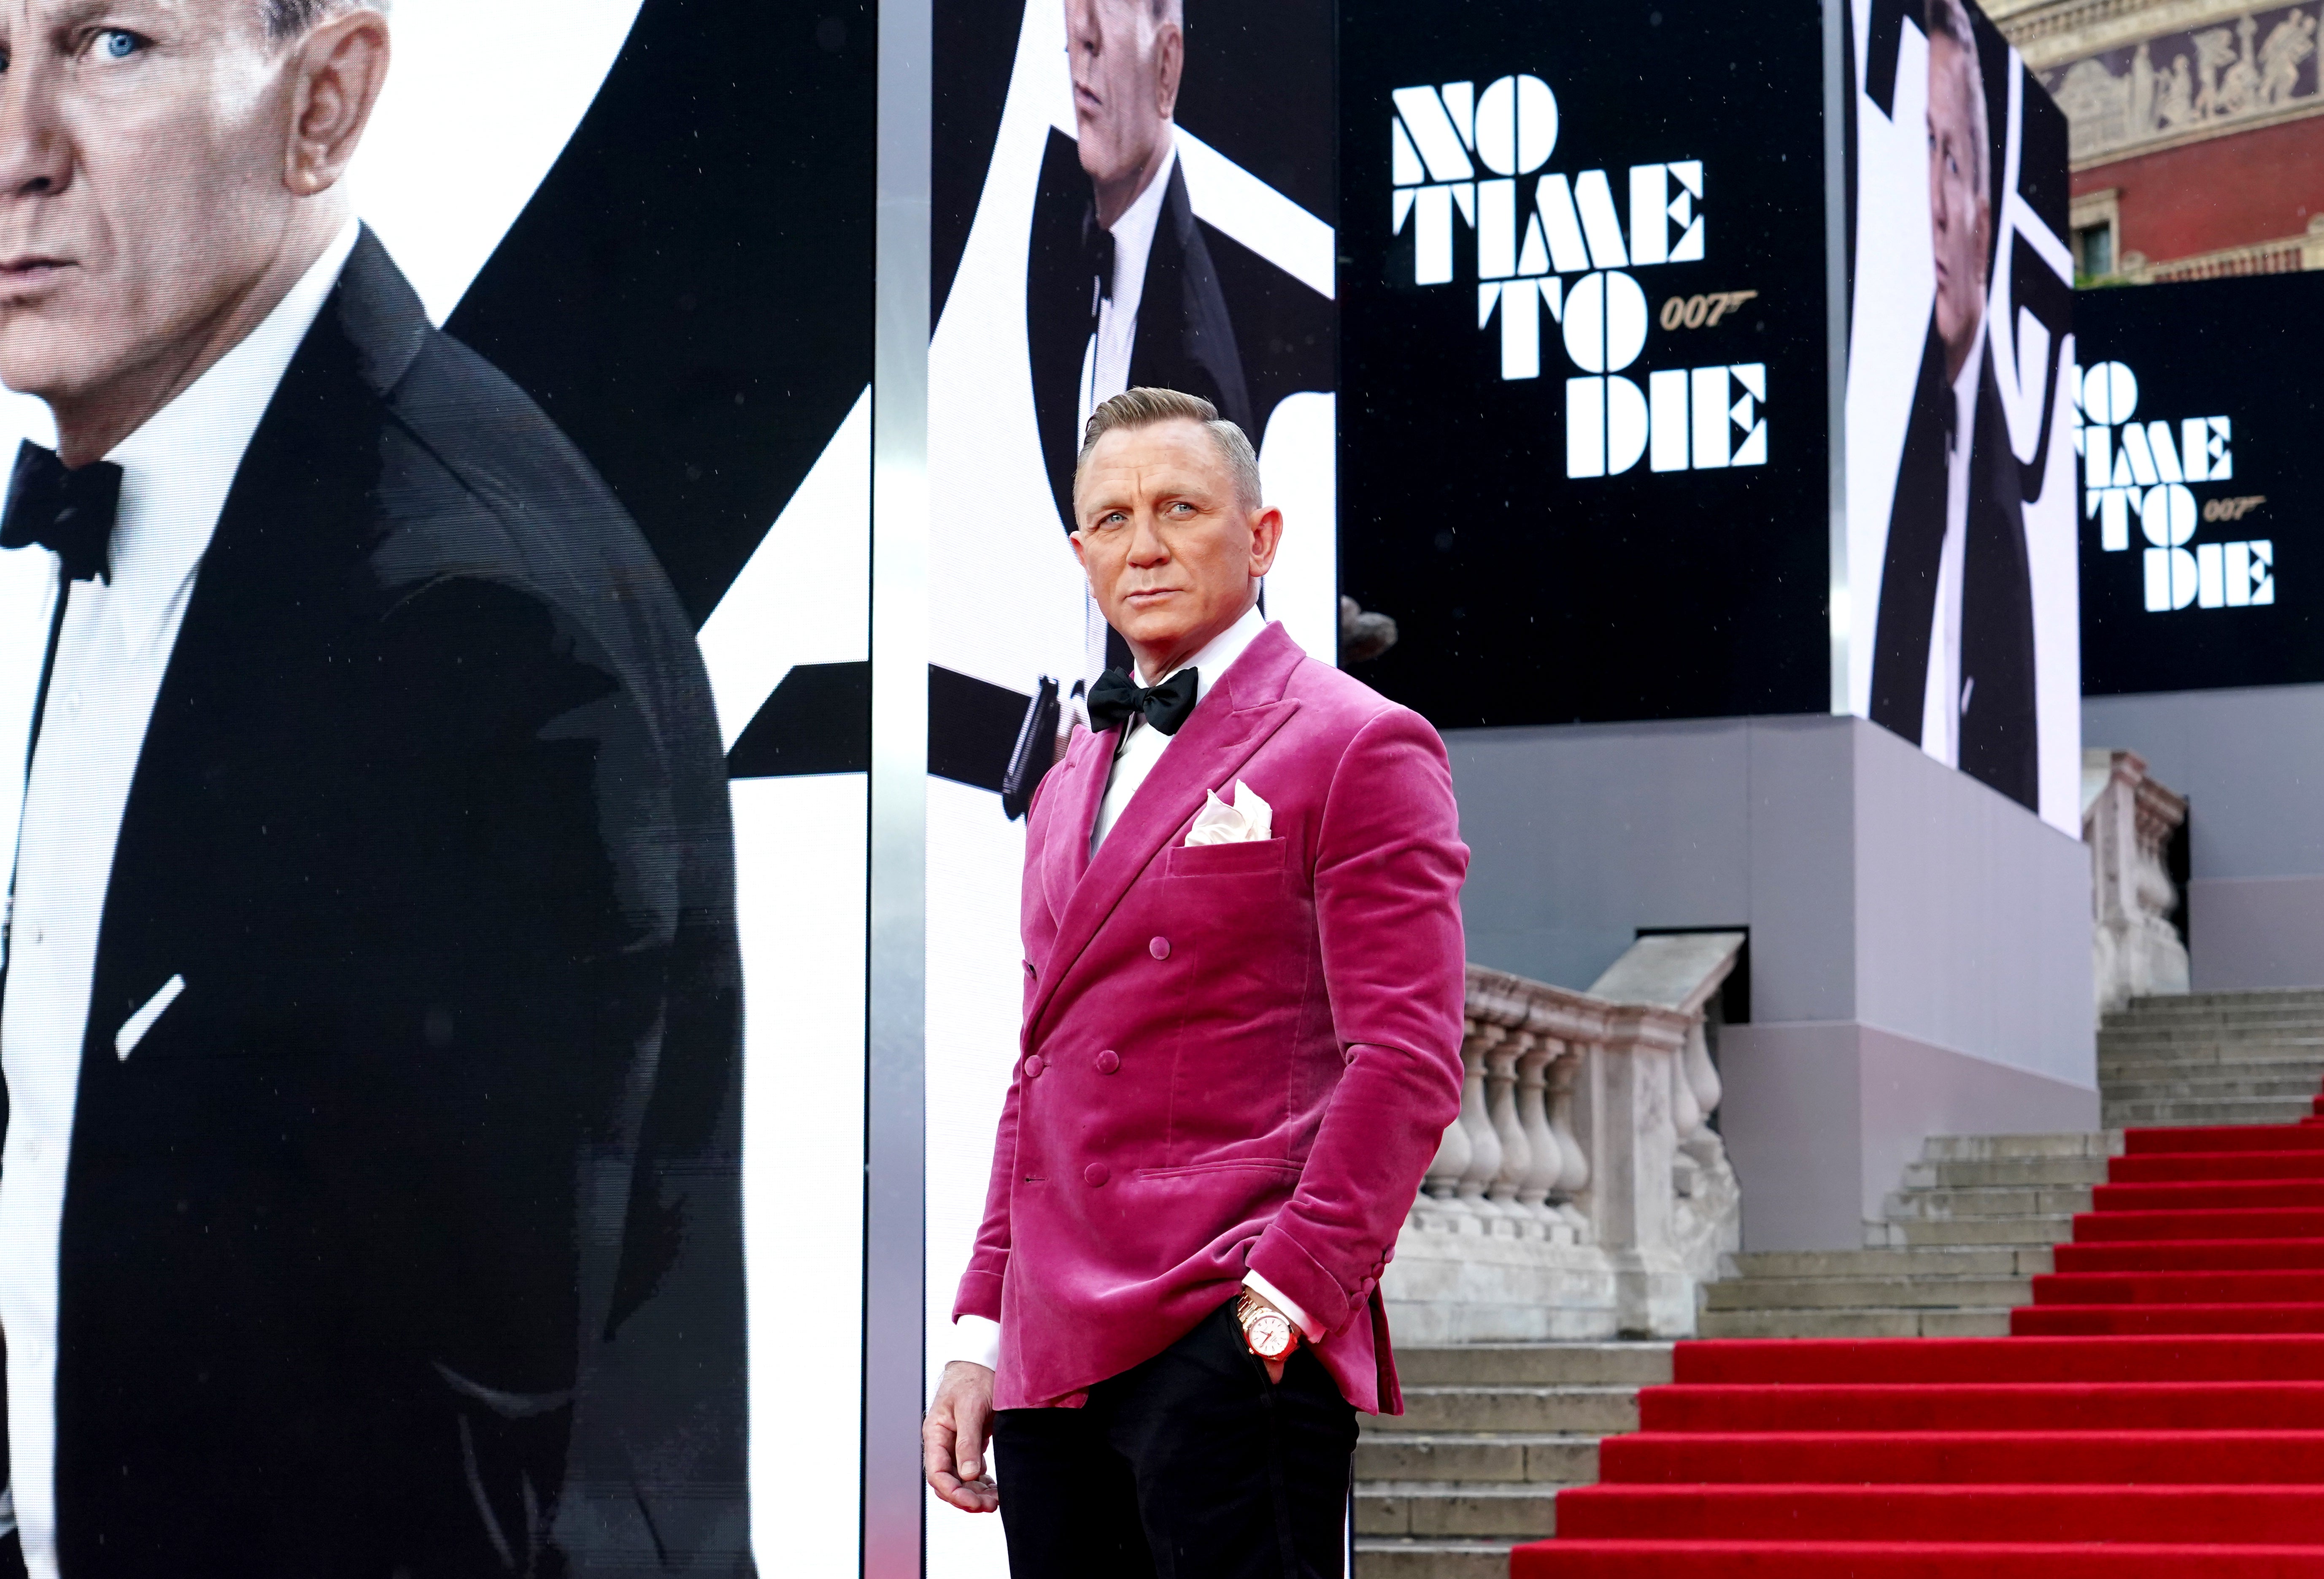 James Bond actor Daniel Craig at the World Premiere of No Time To Die, at the Royal Albert Hall in London last September (Ian West/PA)